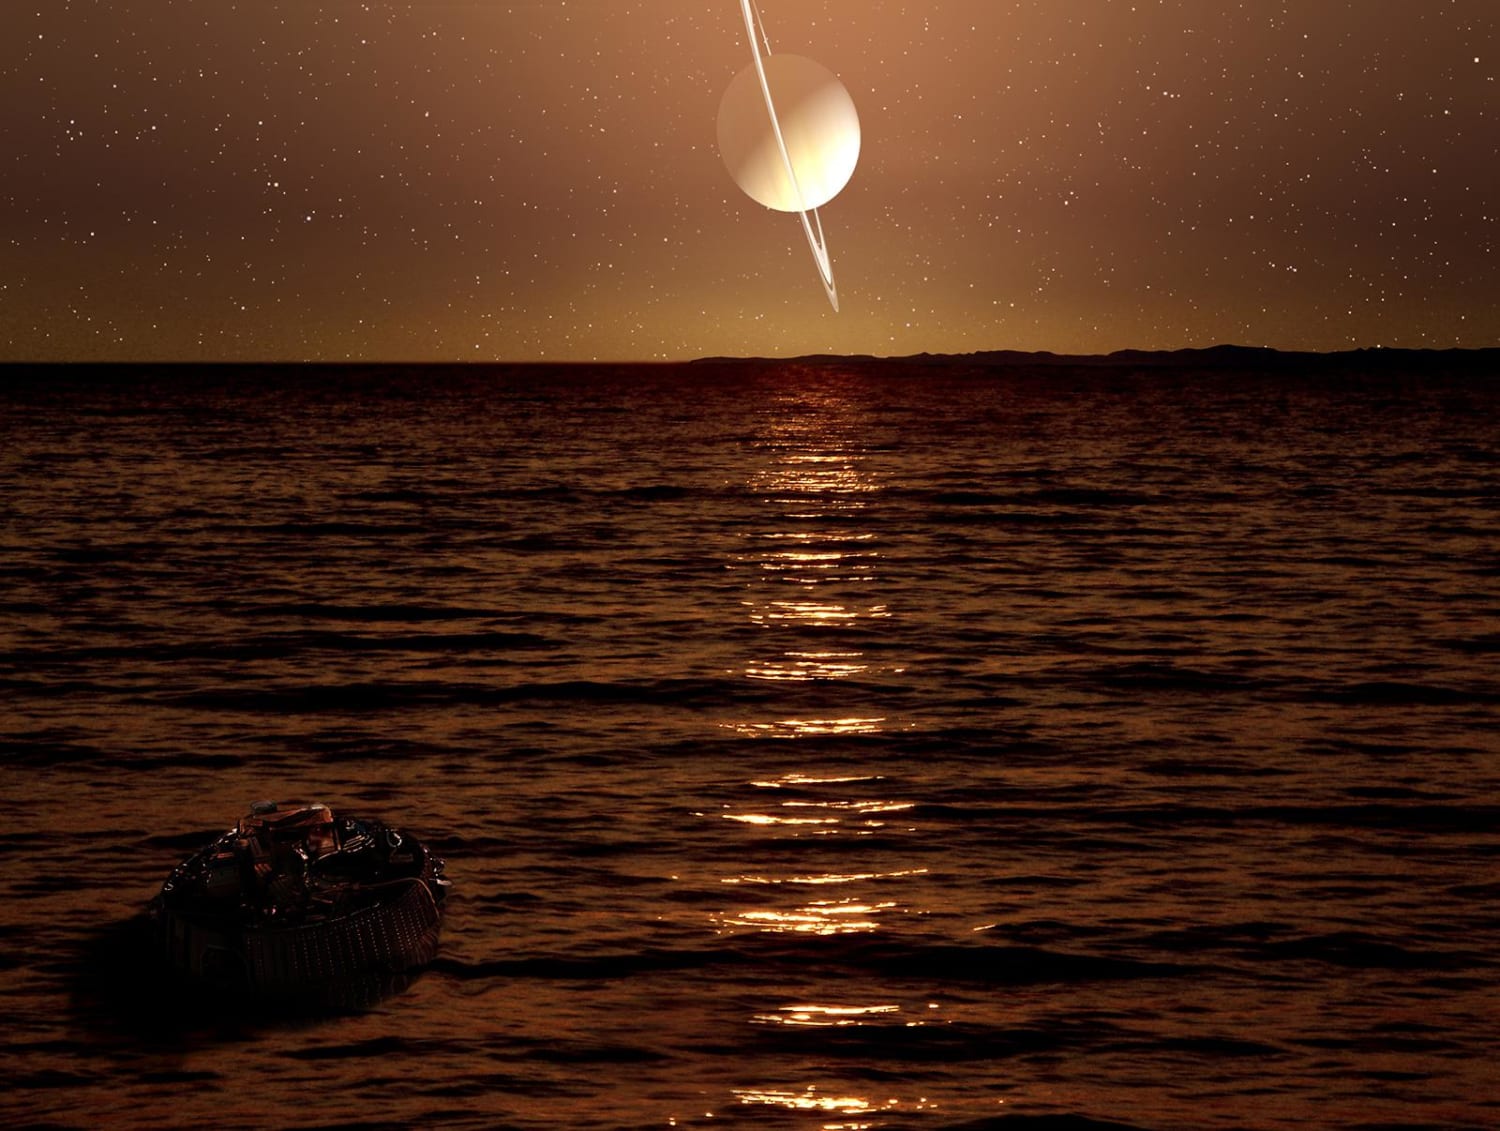 An Artist's impression of The Hugens Probe floating above sea of Methane on Saturn's Moon, Titan